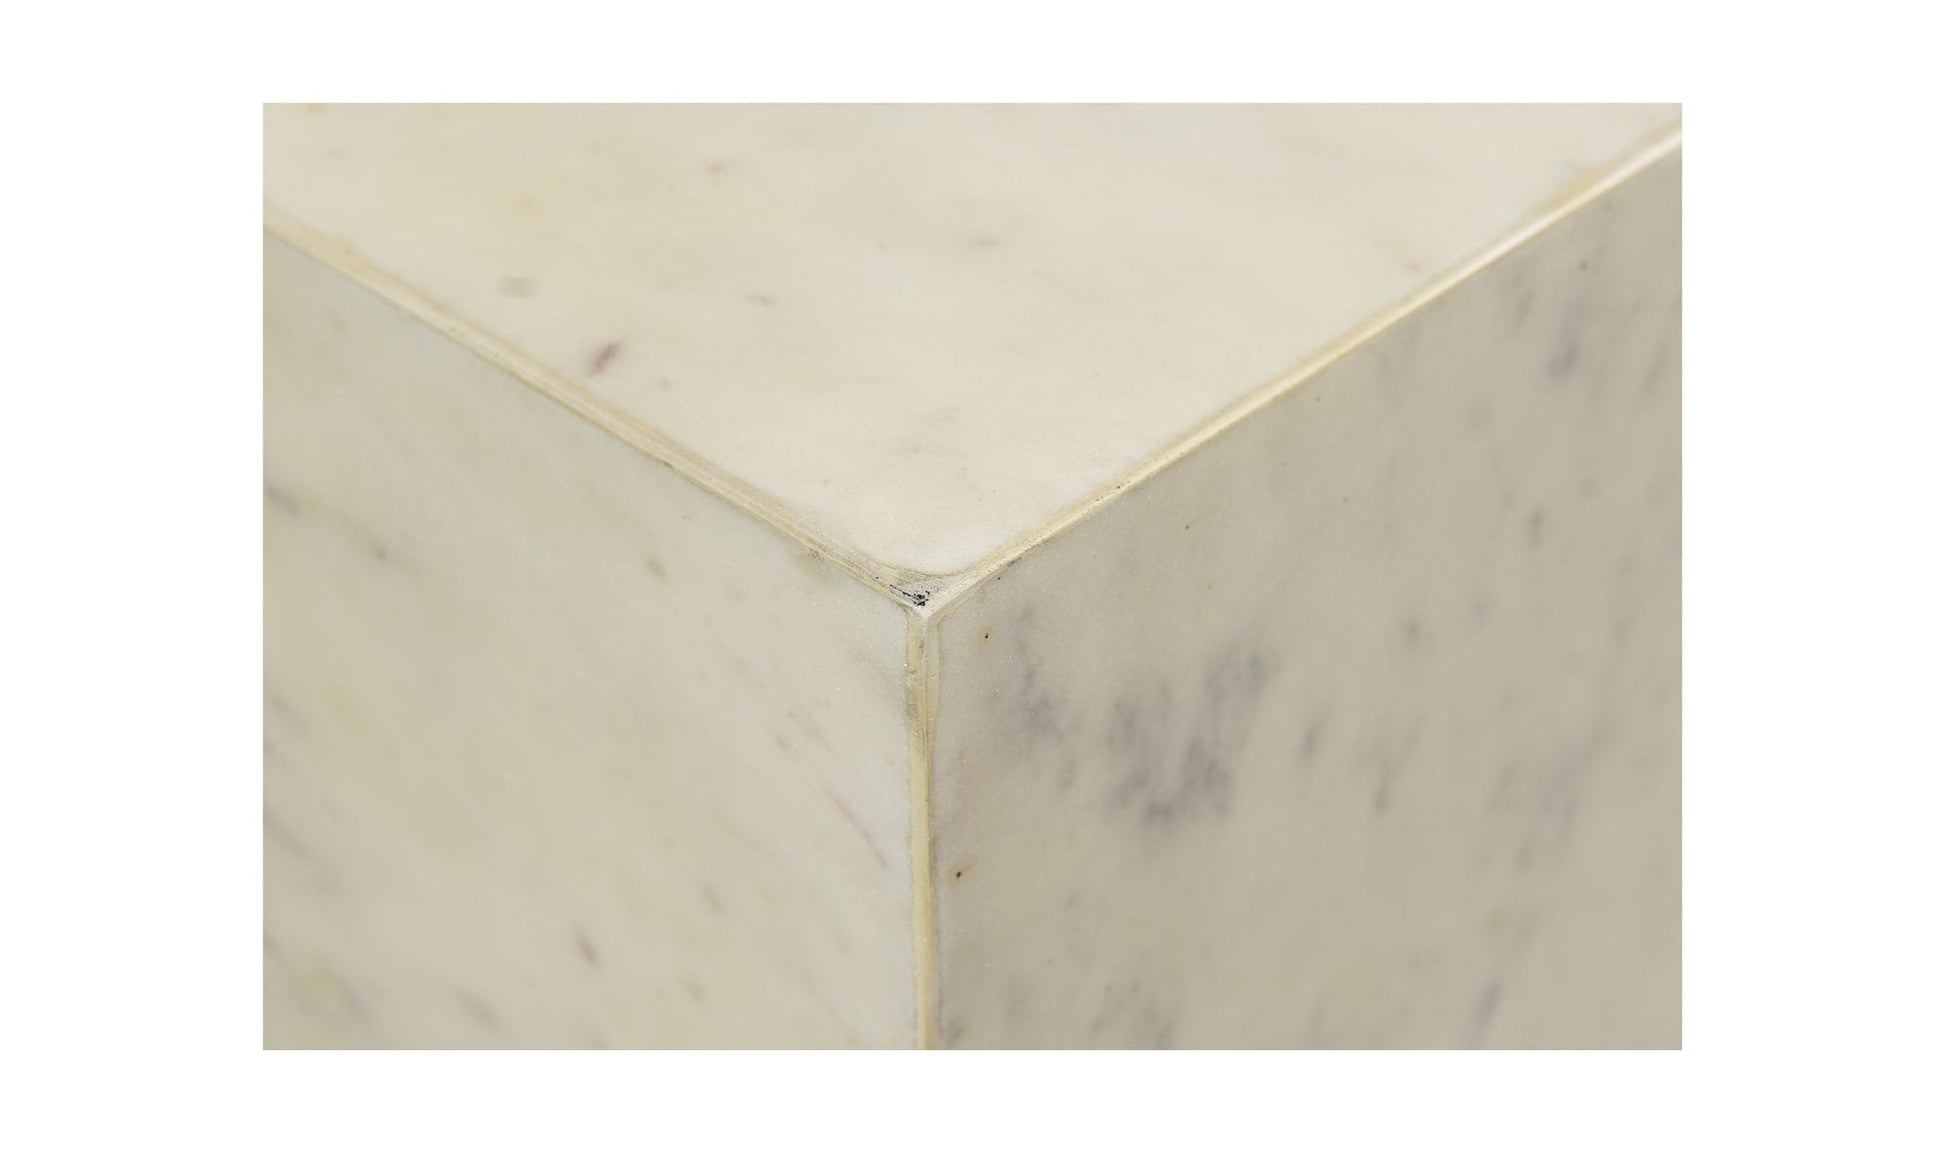 Moe's Furniture NASH COFFEE TABLE- WHITE MARBLE